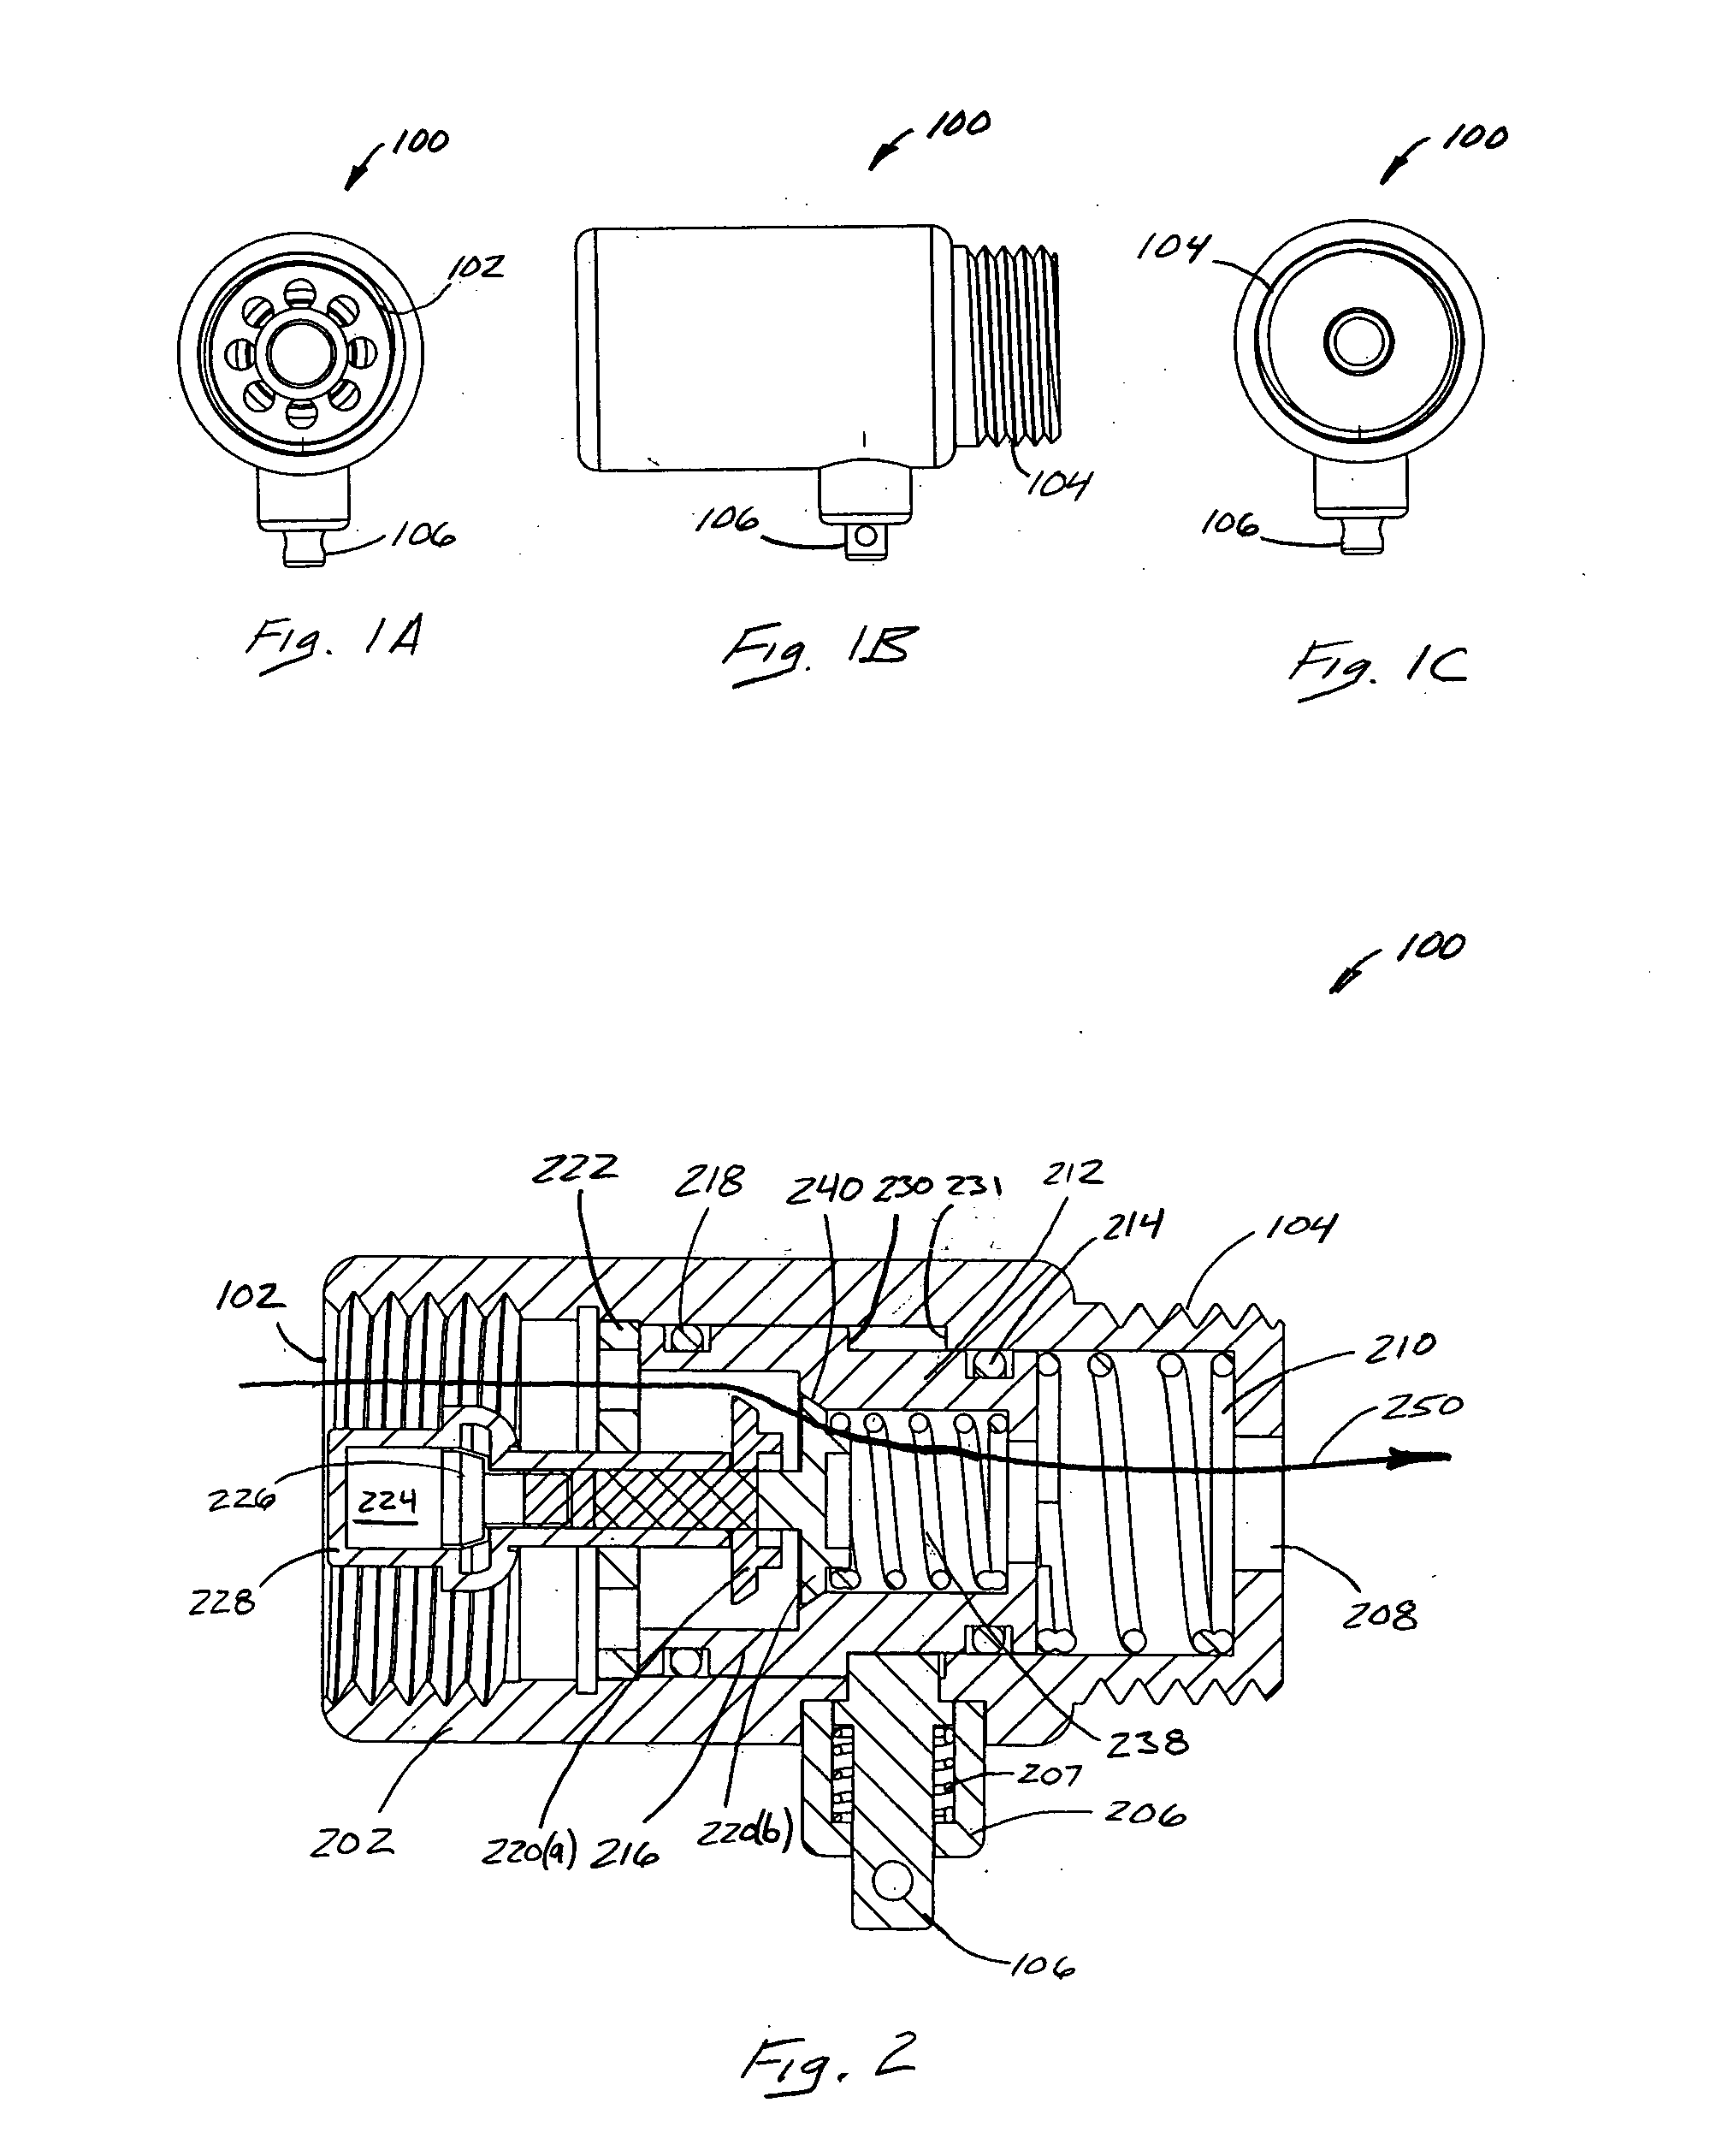 Methods and apparatus for an automatic temperature-controlled valve